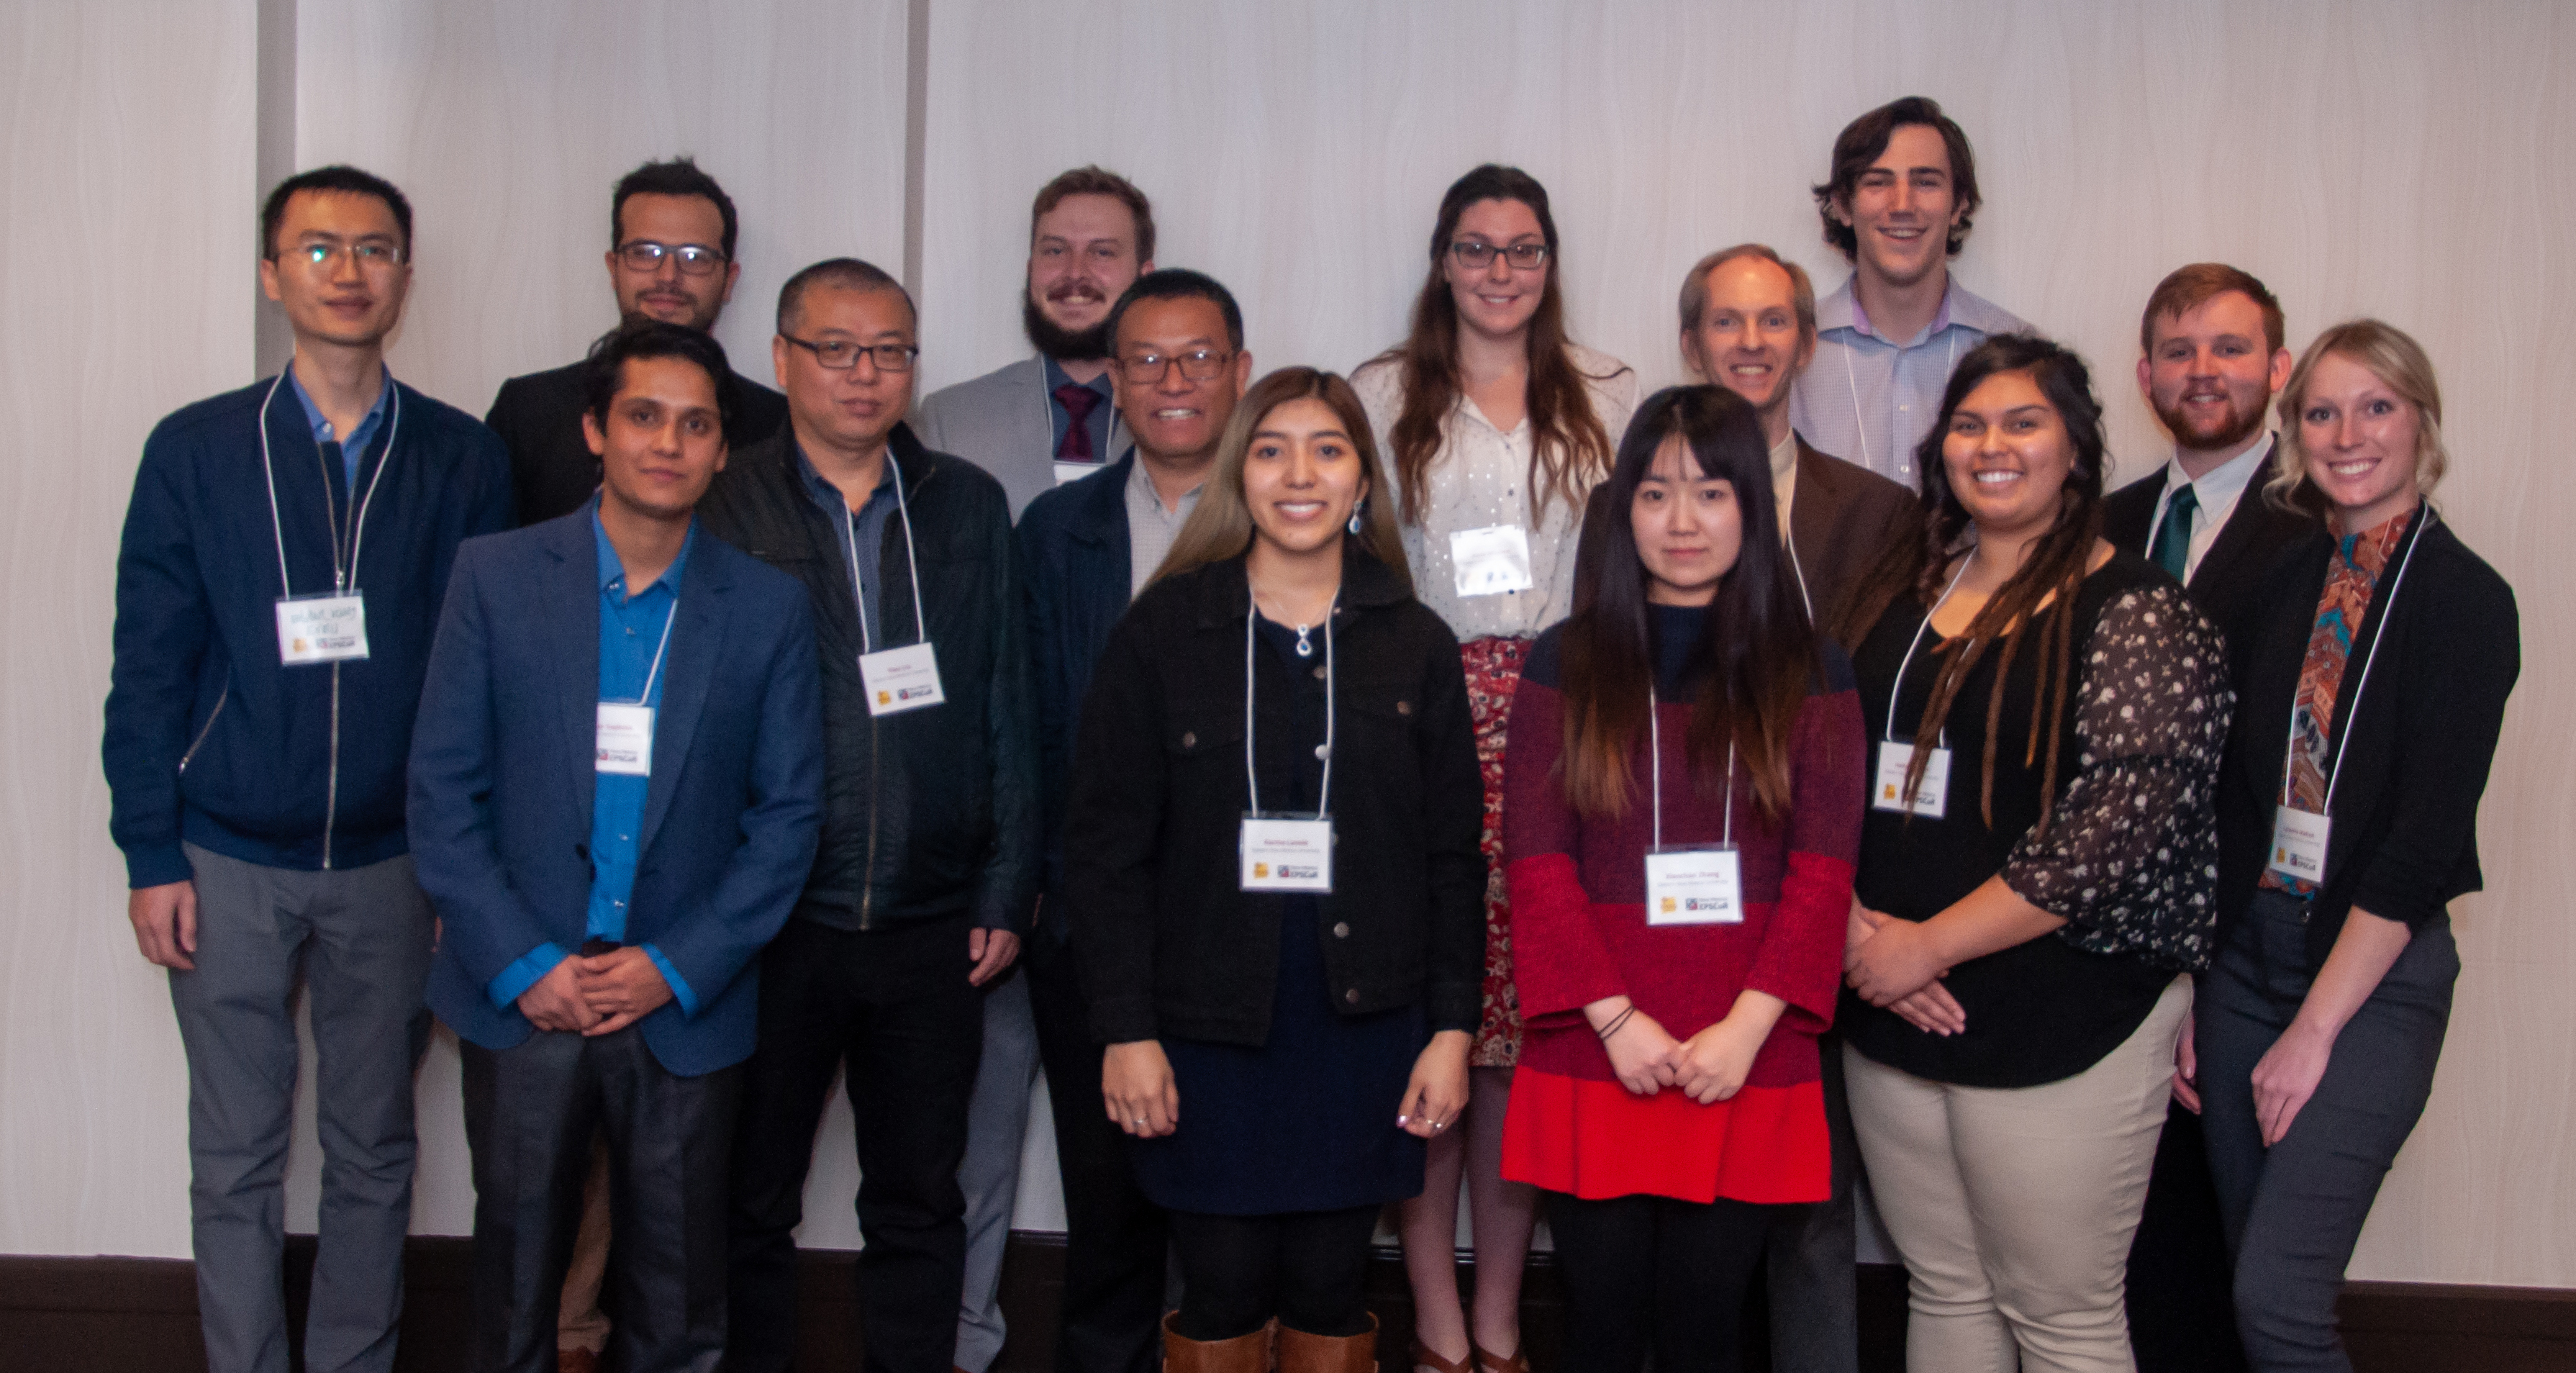 Dr. Yan and his group of ENMU students at the 2019 NM Research Symposium